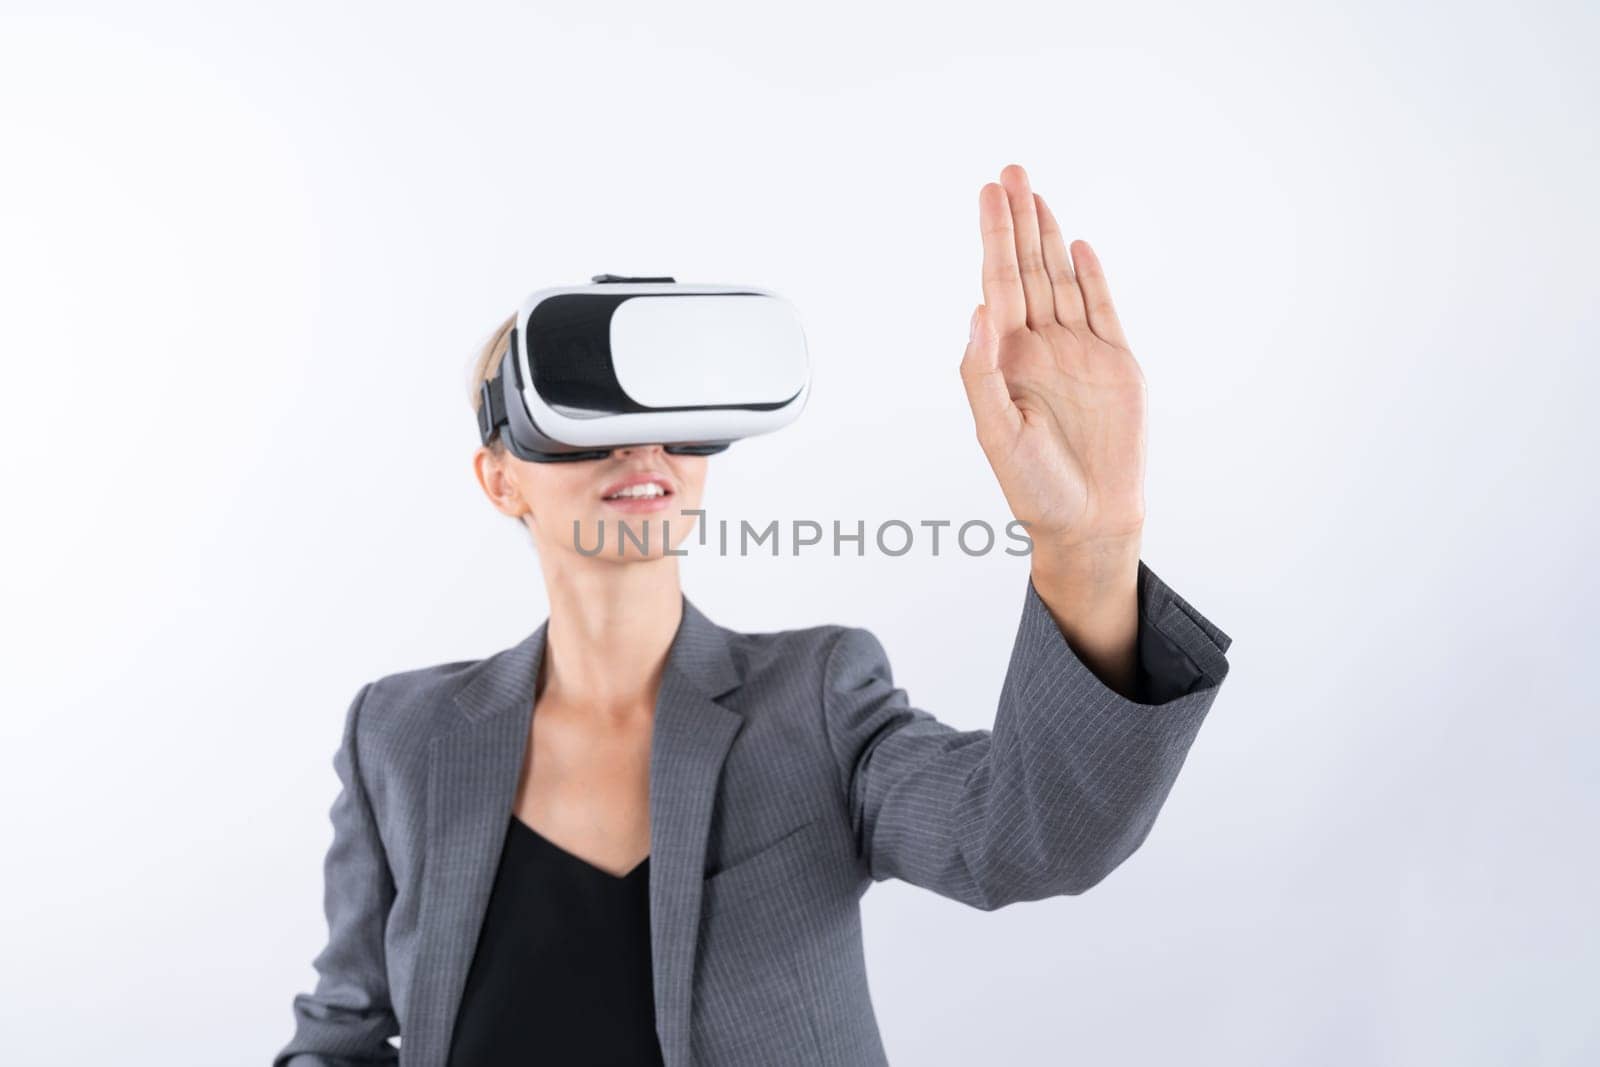 Smart business woman touching something while look though VR glass. Skilled project manager wearing suit and innovation technology visual reality goggles for connecting with metaverse. Contraption.